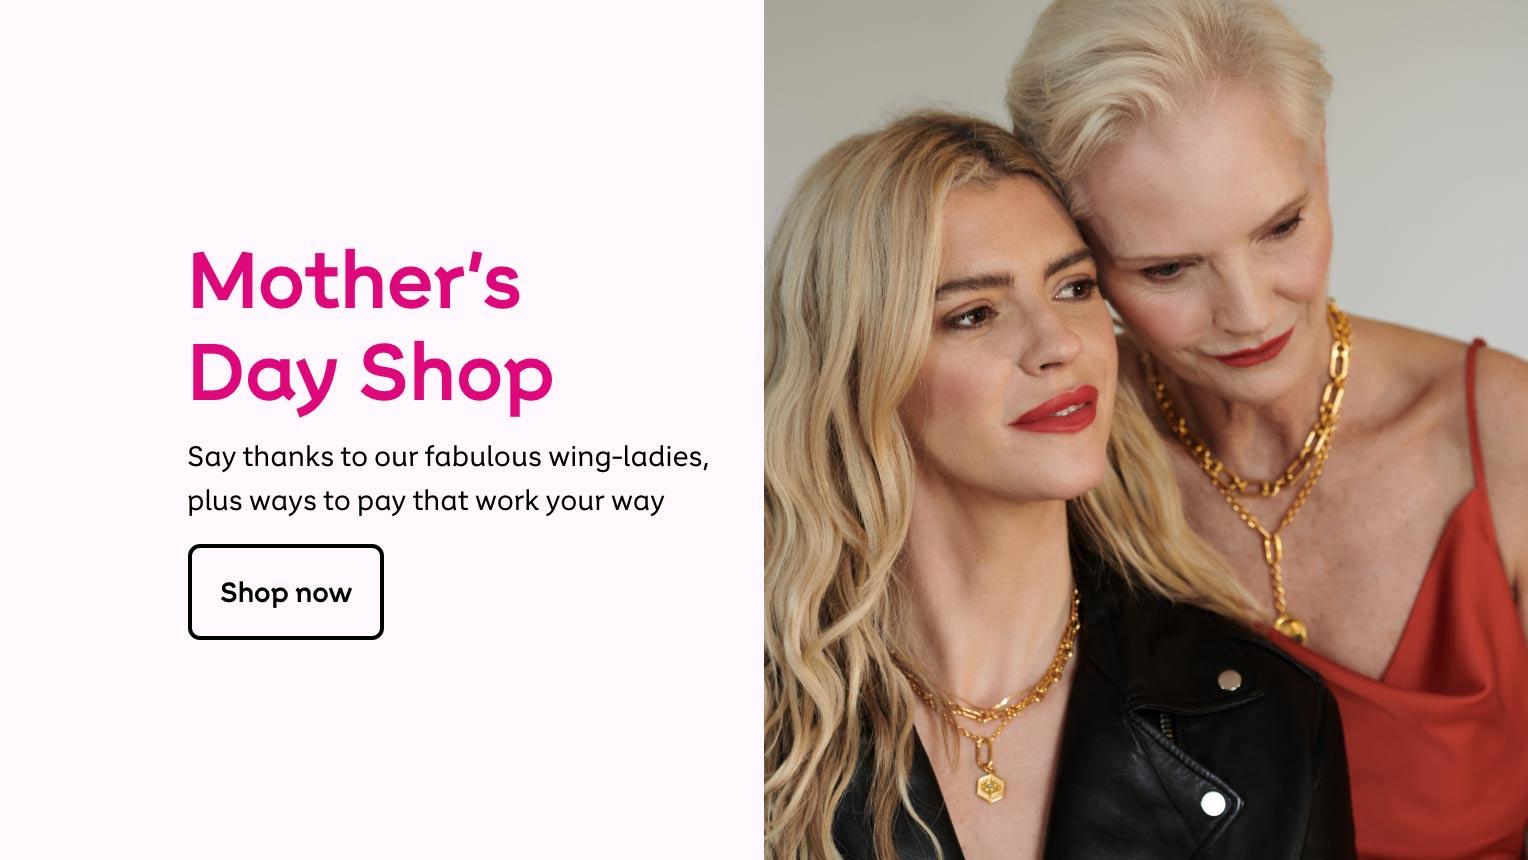 Mother's Day. Say thanks to our fabulous wing-ladies, plus ways to pay that work your way. Shop now